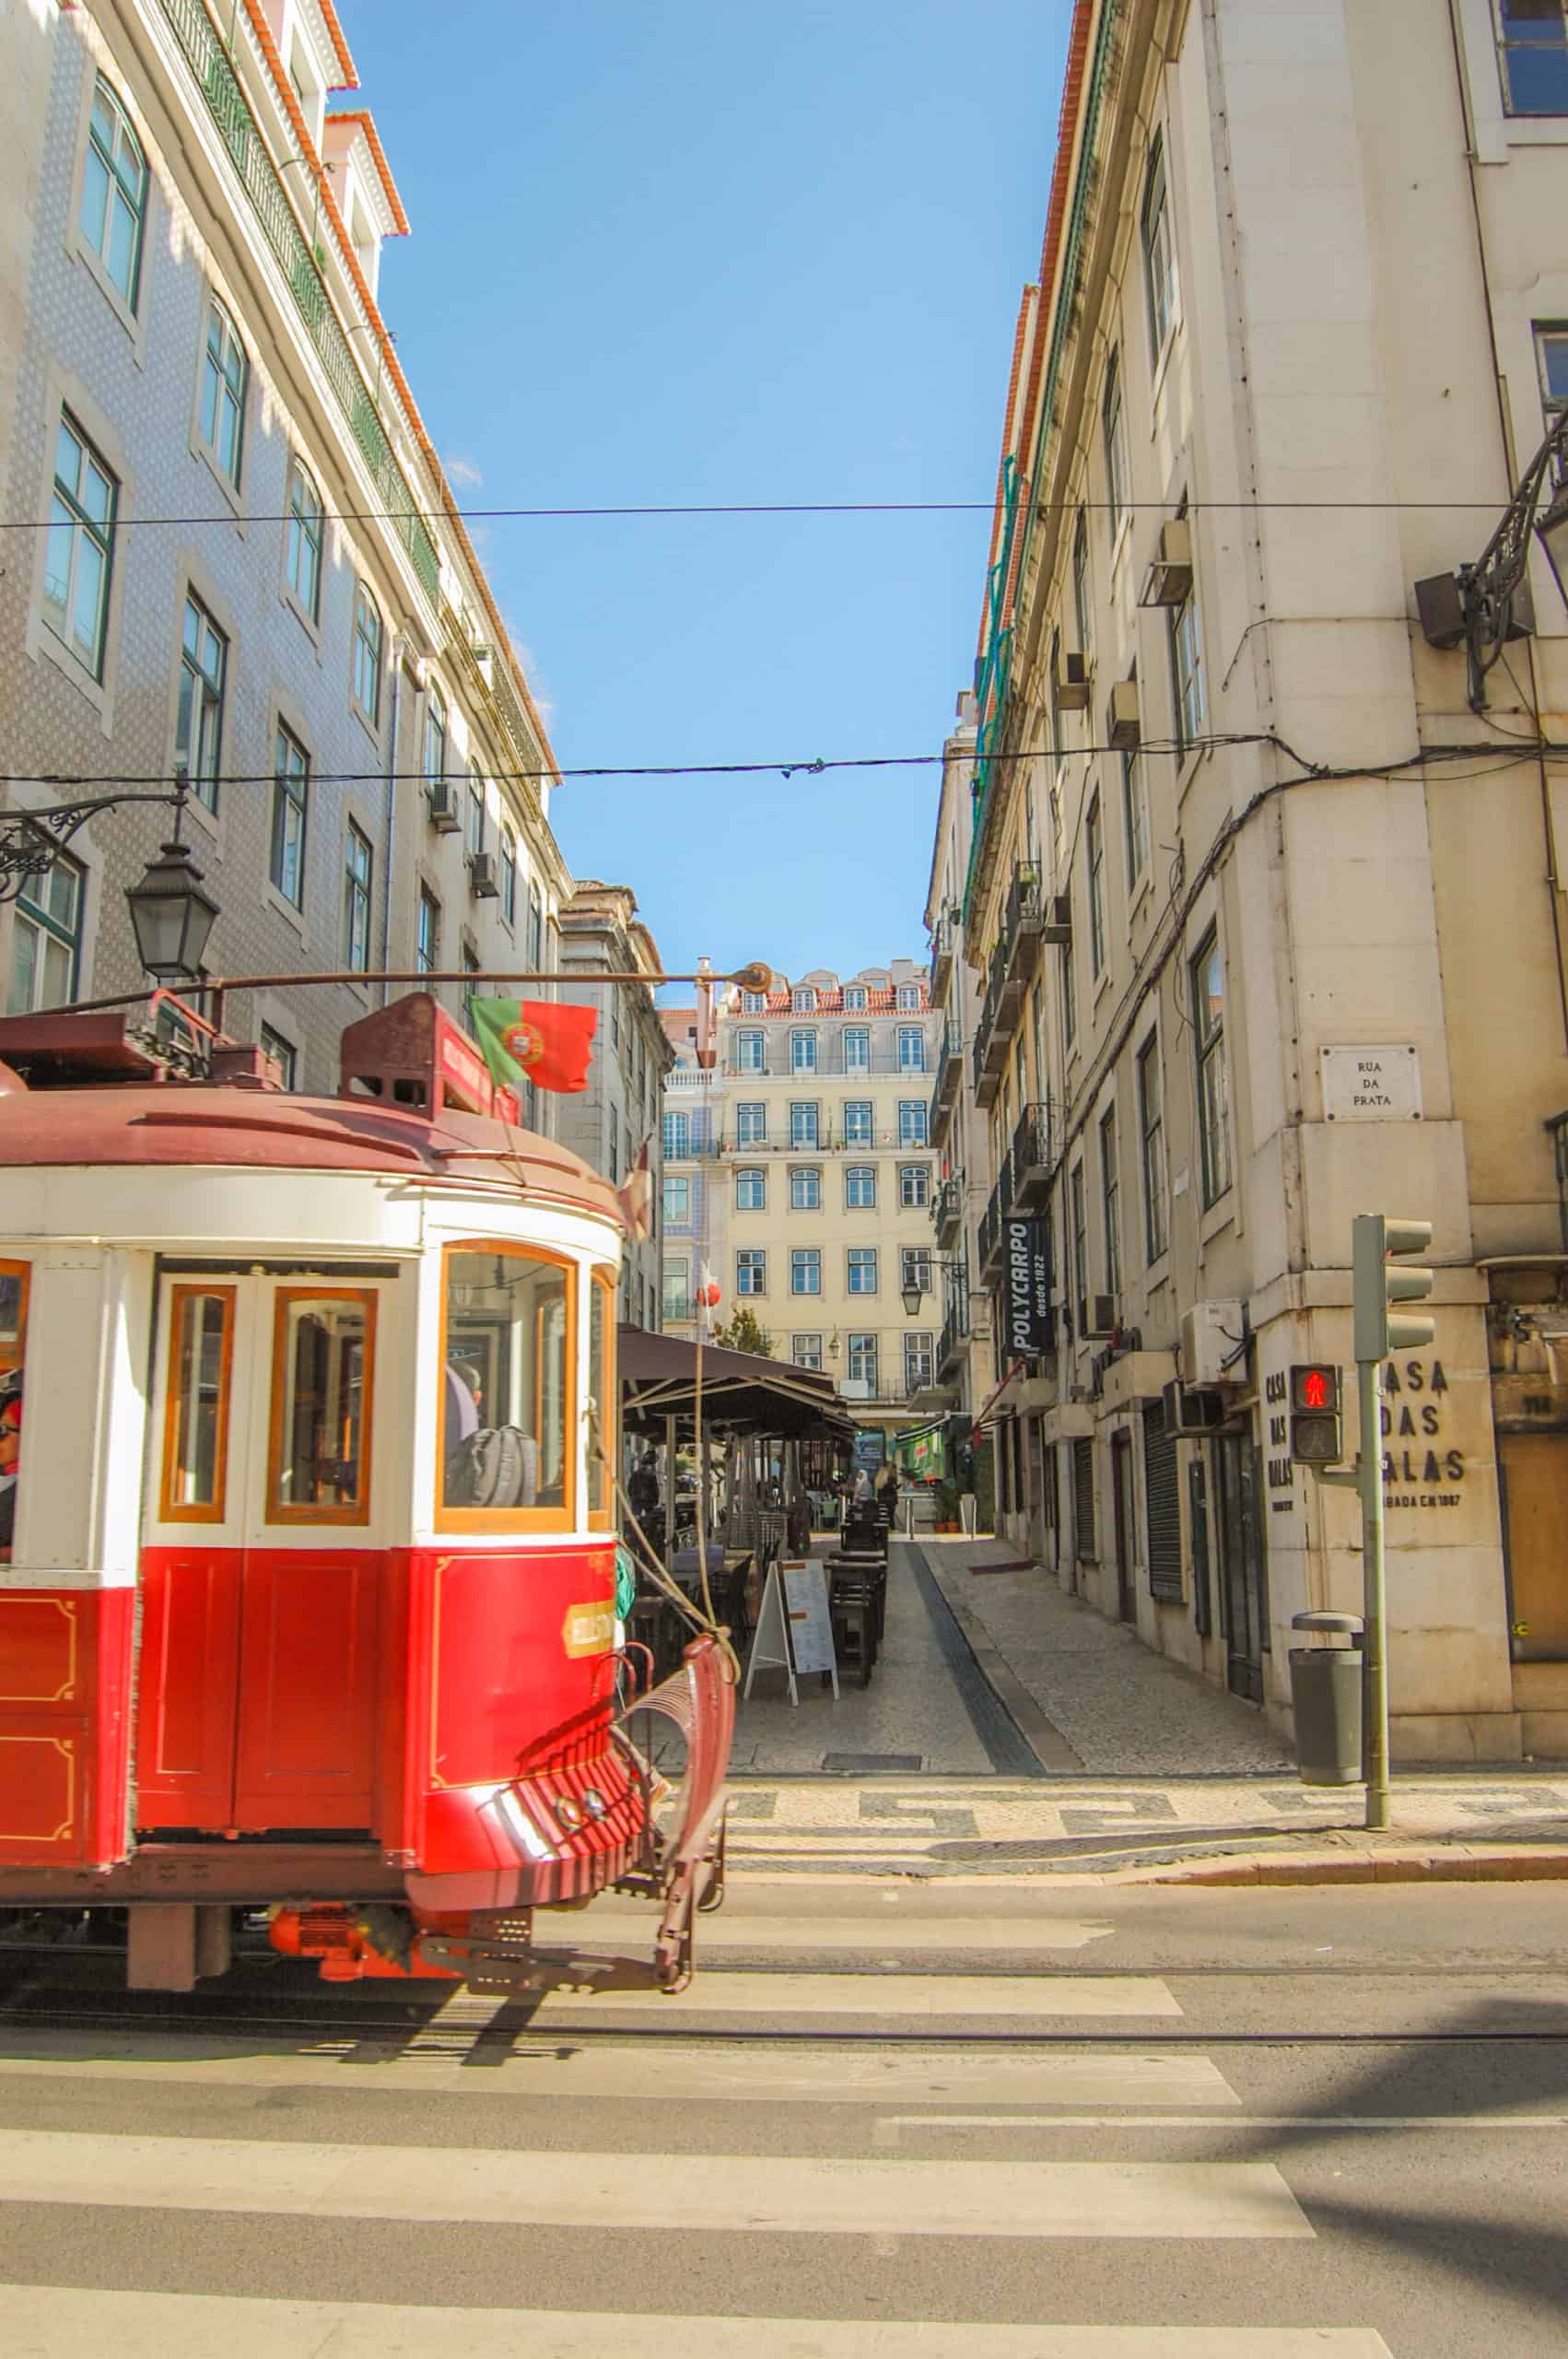 Walking in Lisbon with red tram